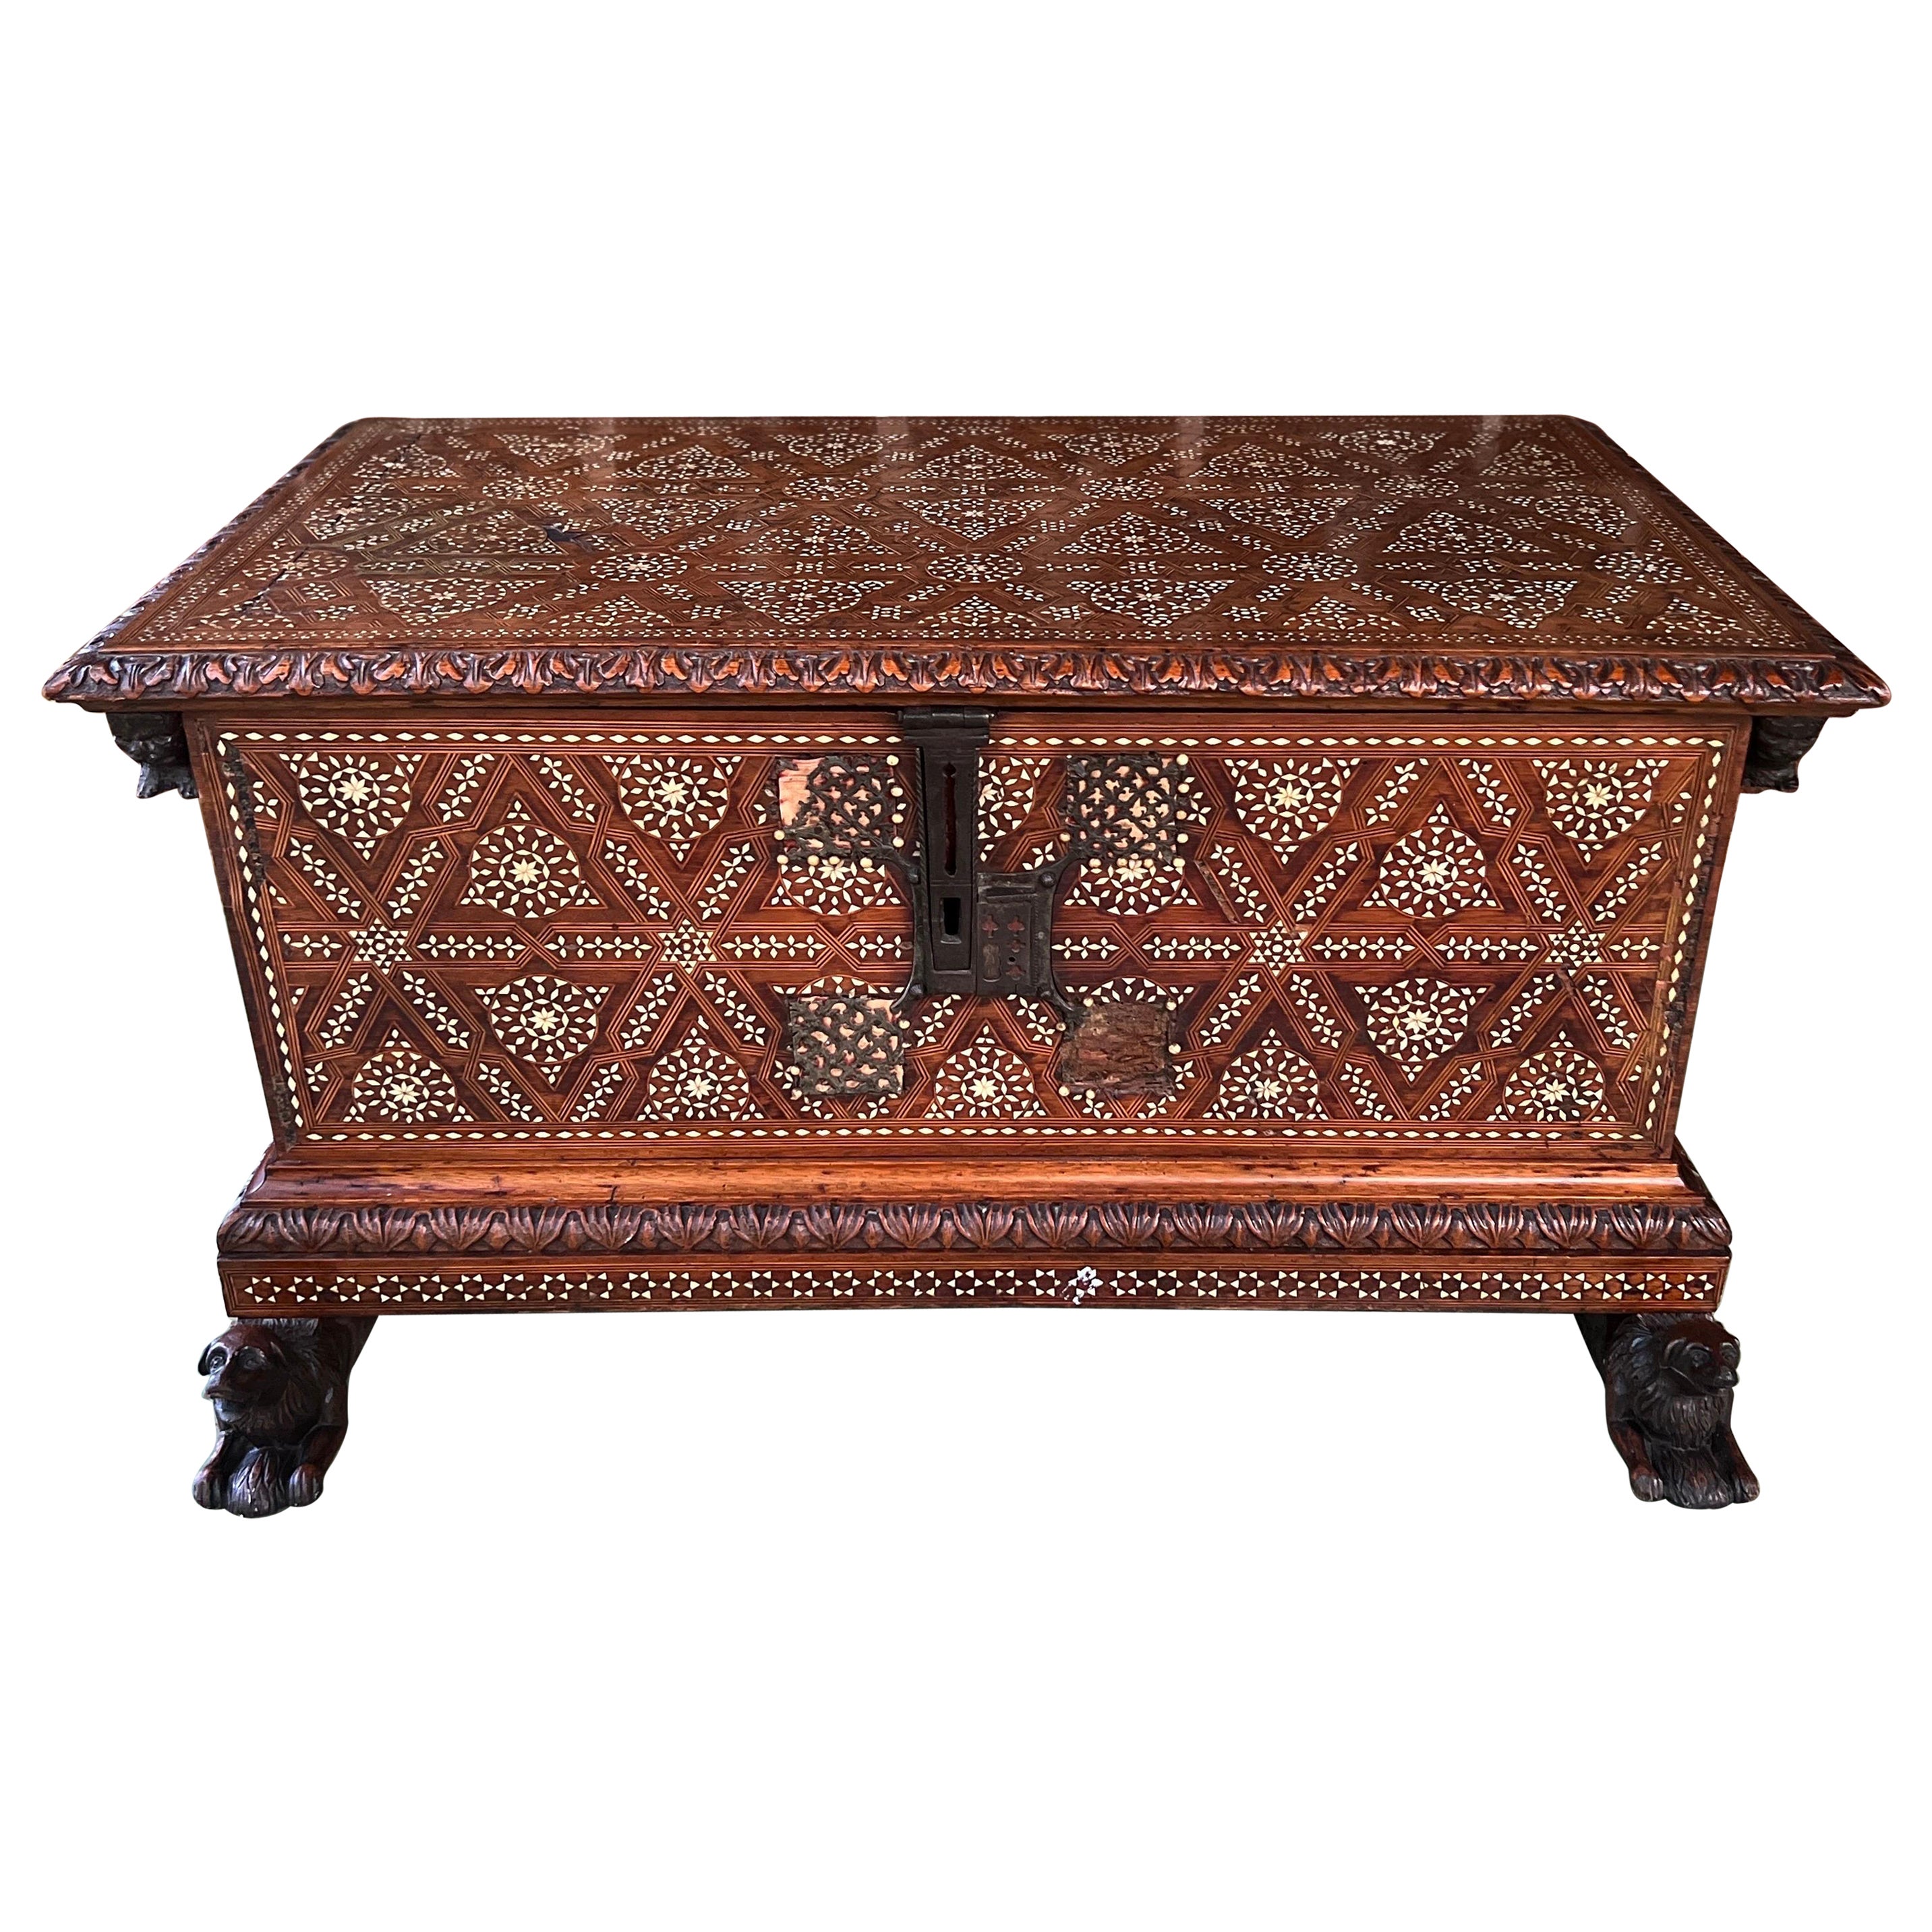 Museum Quality 18th Century Syrian Anglo Indian Carved & Inlaid Blanket Chest